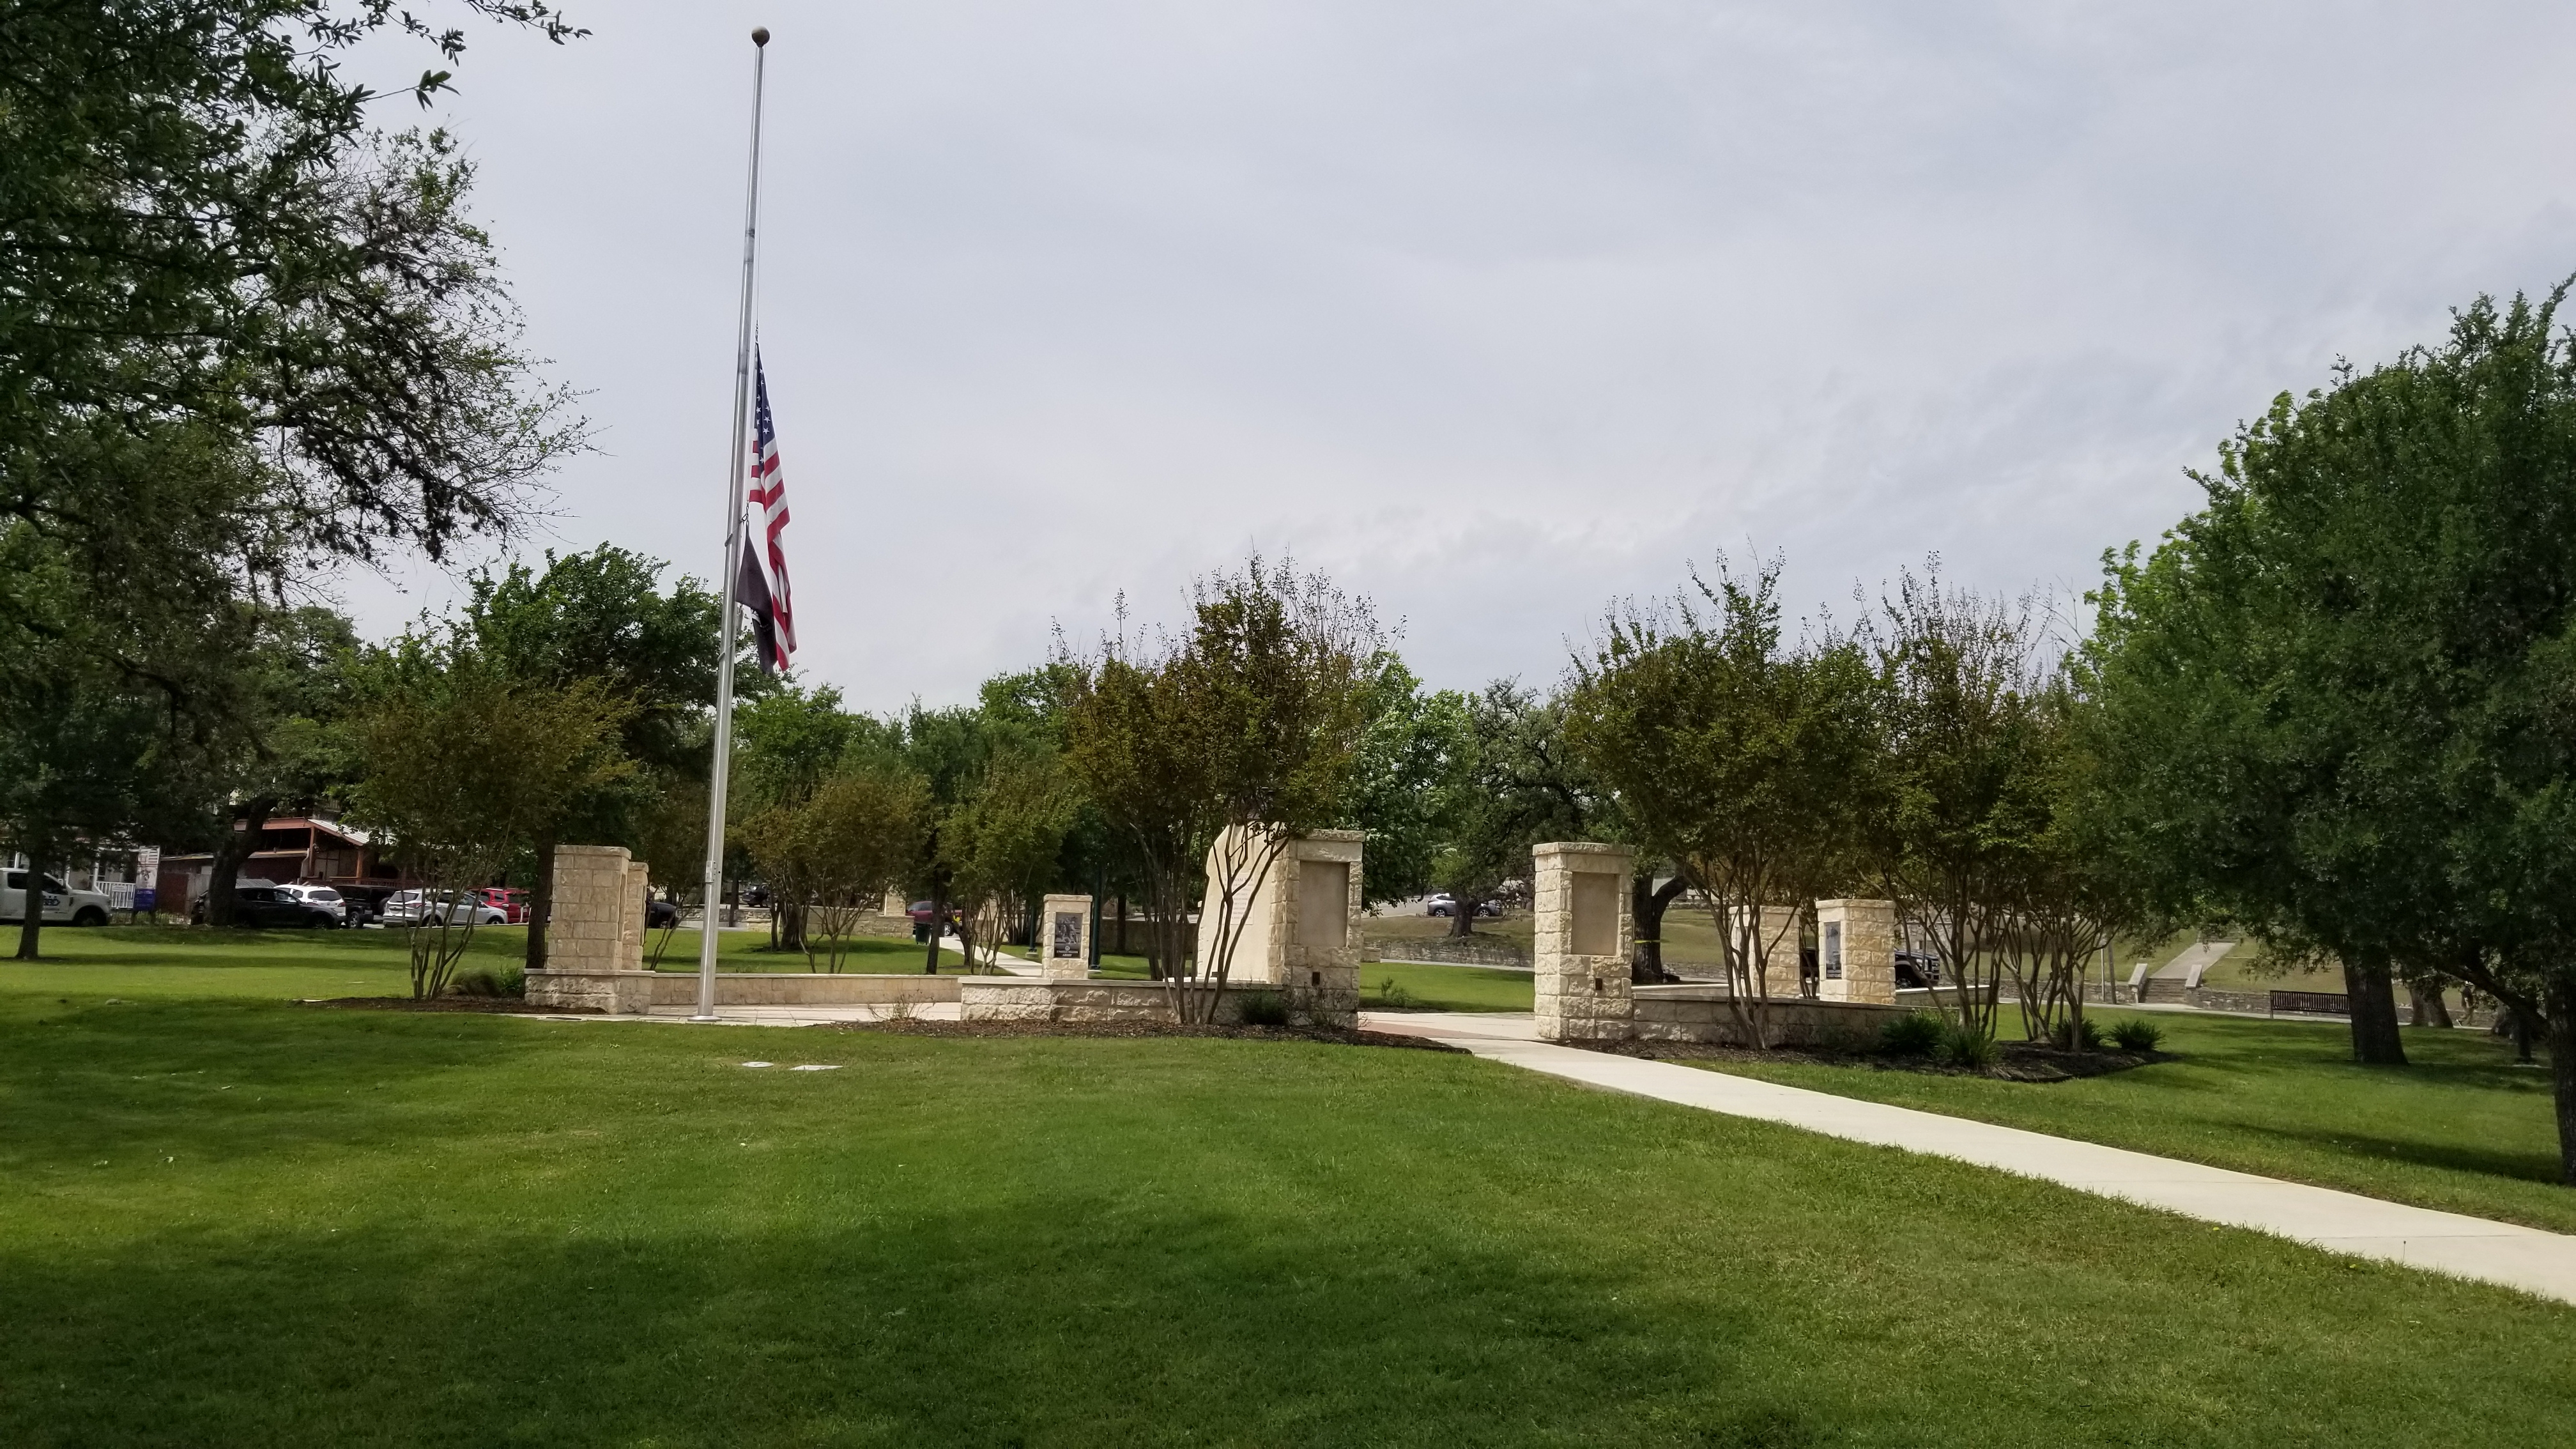 The main view of the Veterans Plaza